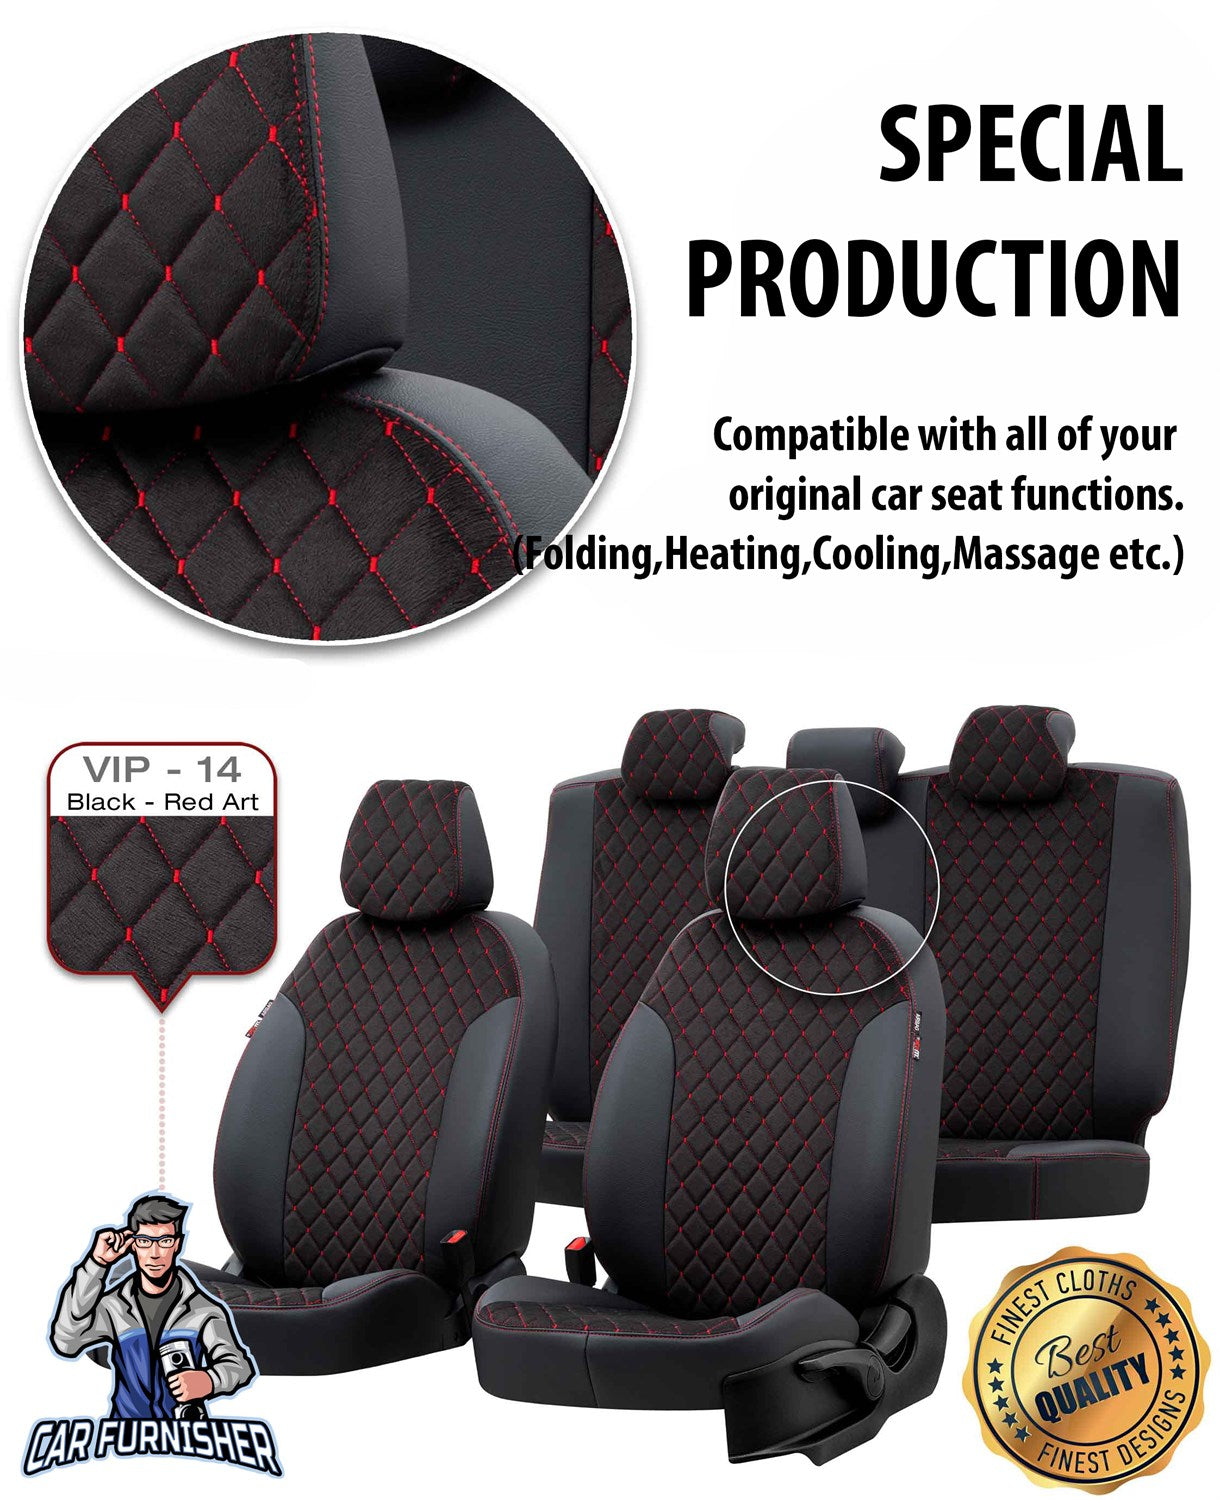 Volkswagen Golf Seat Cover Madrid Foal Feather Design Smoked Leather & Foal Feather